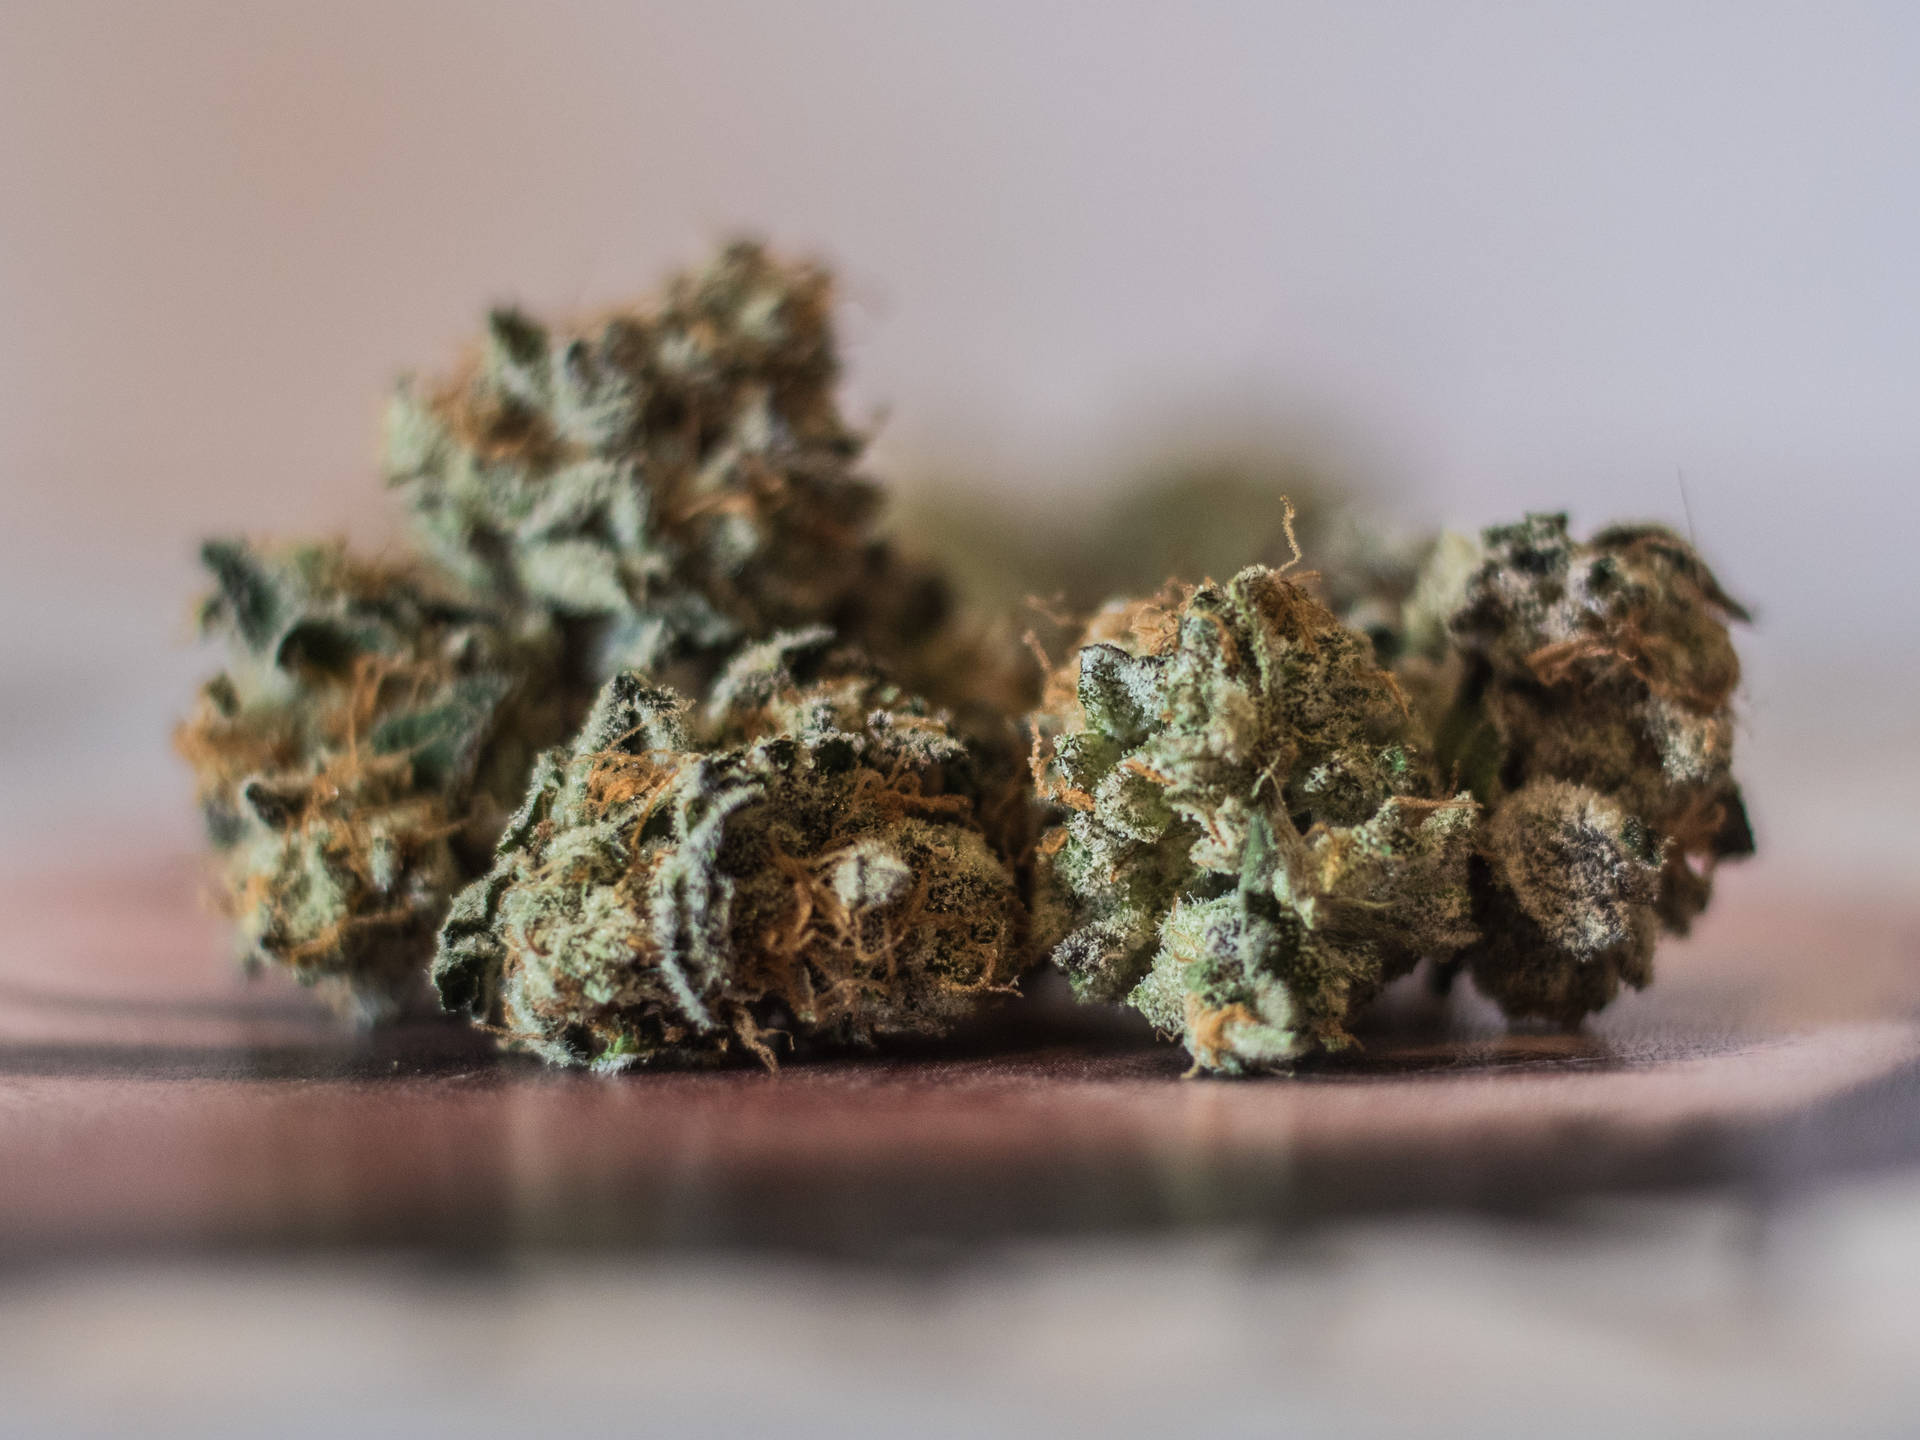 Take a moment to chill and enjoy these high-grade dried cannabis buds. Wallpaper